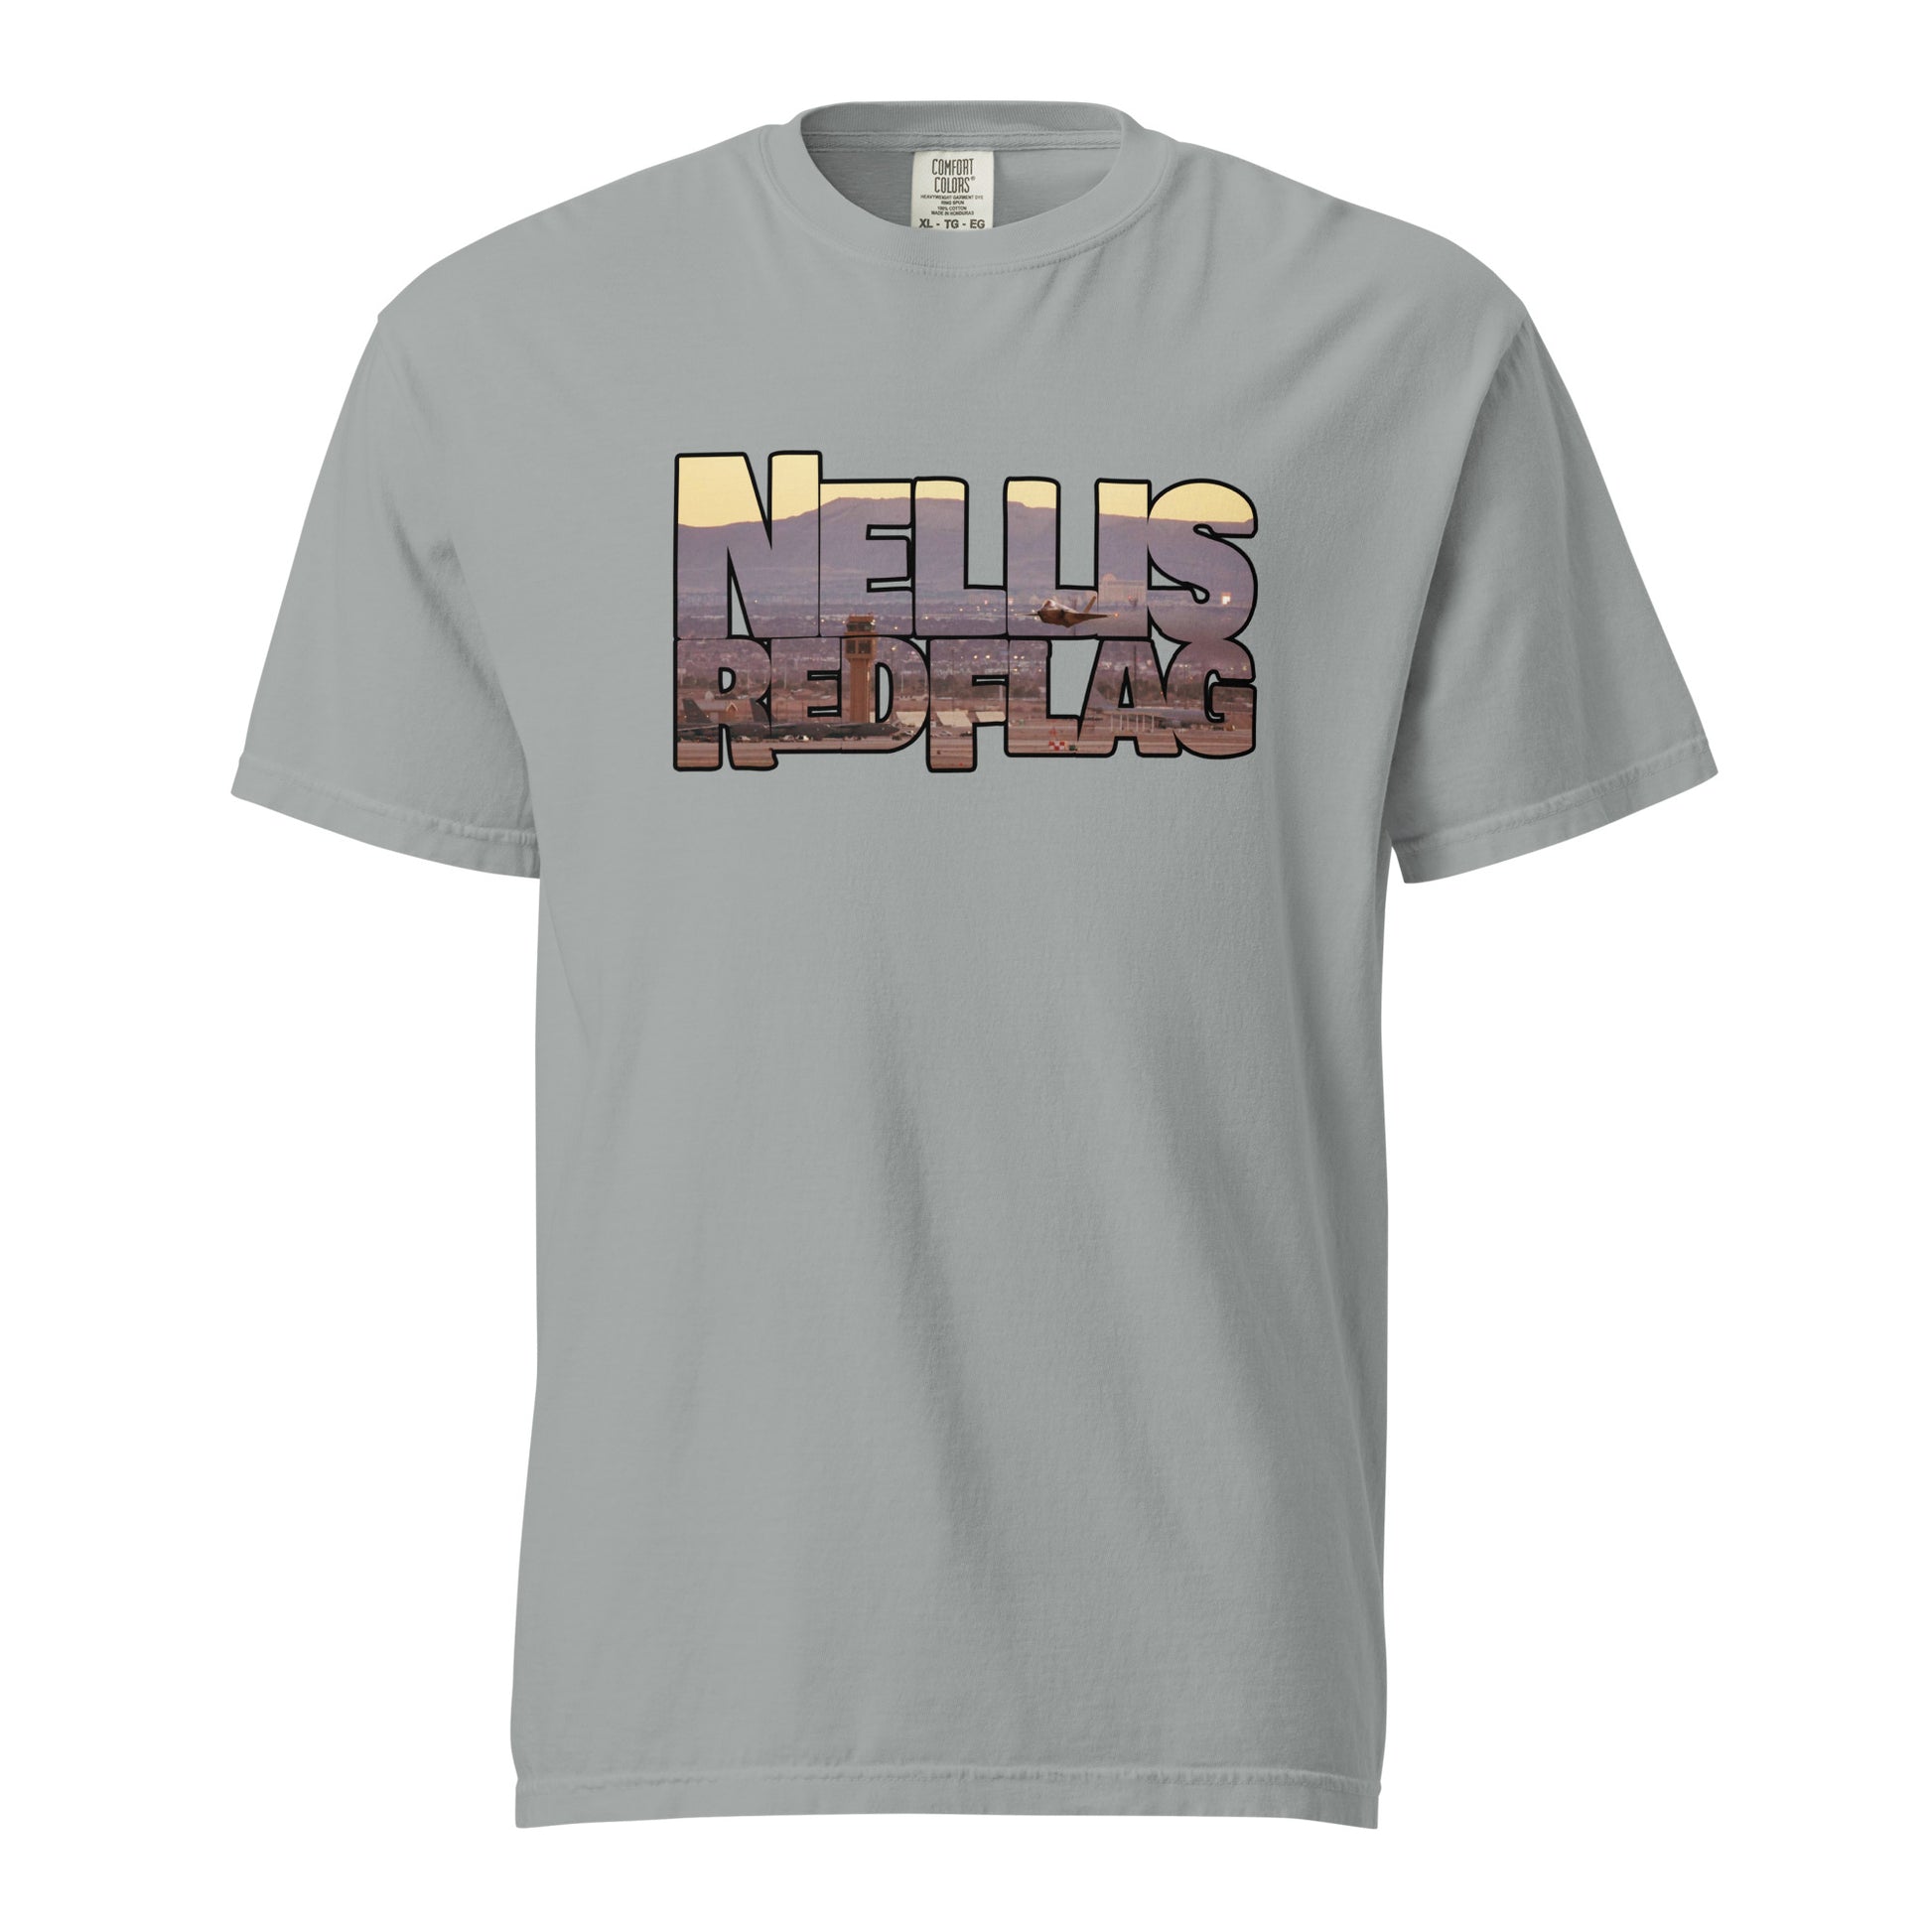 This shirt features an image of an F-35 taking off from Nellis Air Force Base contained inside of the words "Nellis Red Flag"